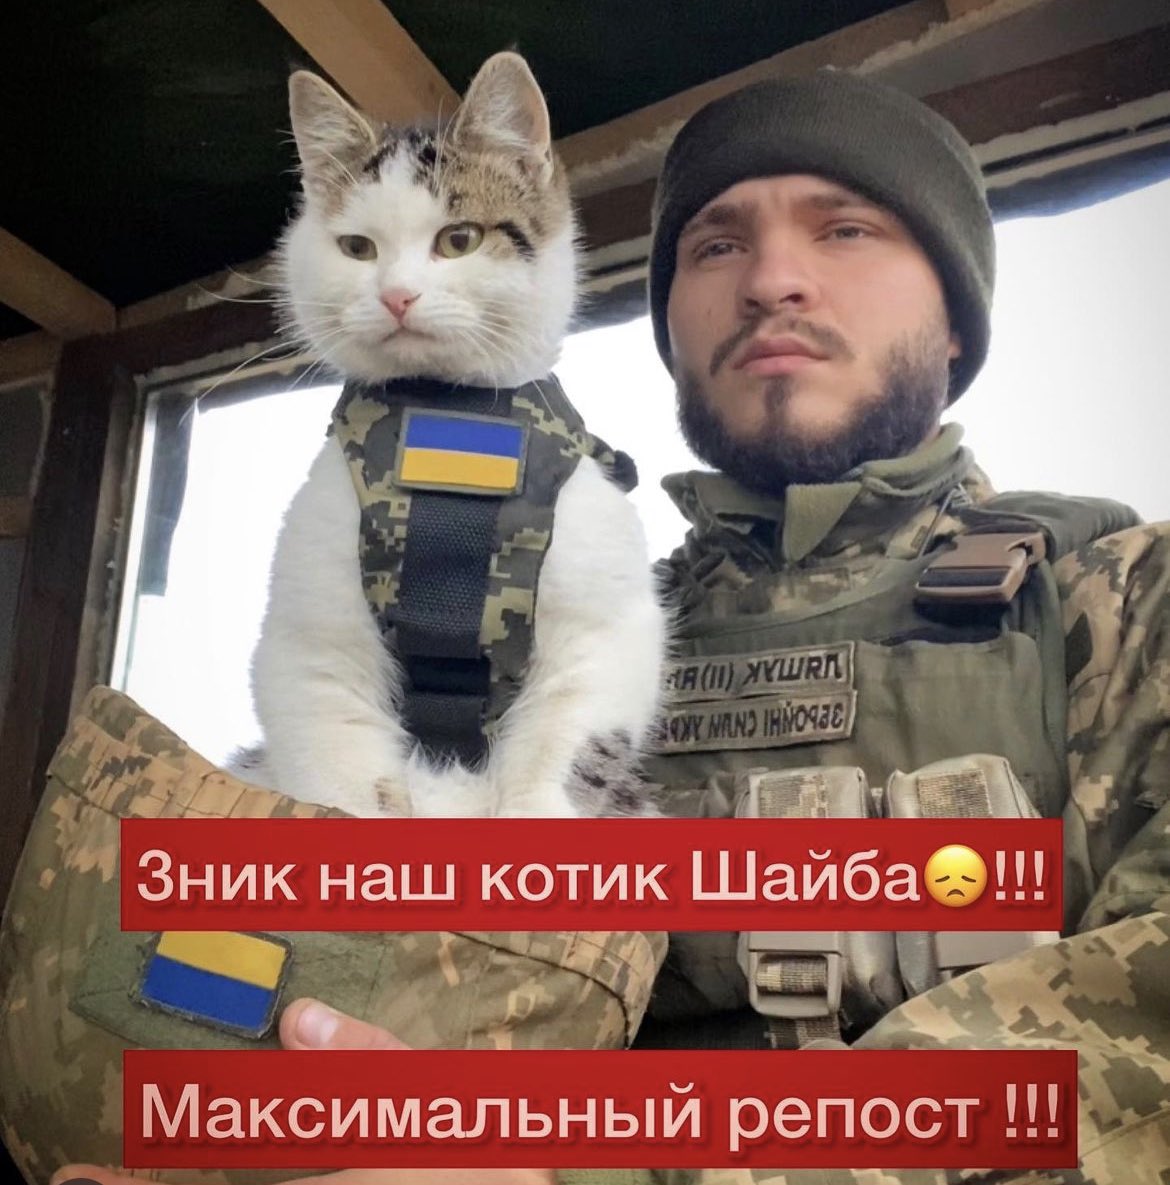 #NAFOCatsDivision 🙏
‼️IMPORTANT: To all in the Odesa region‼️